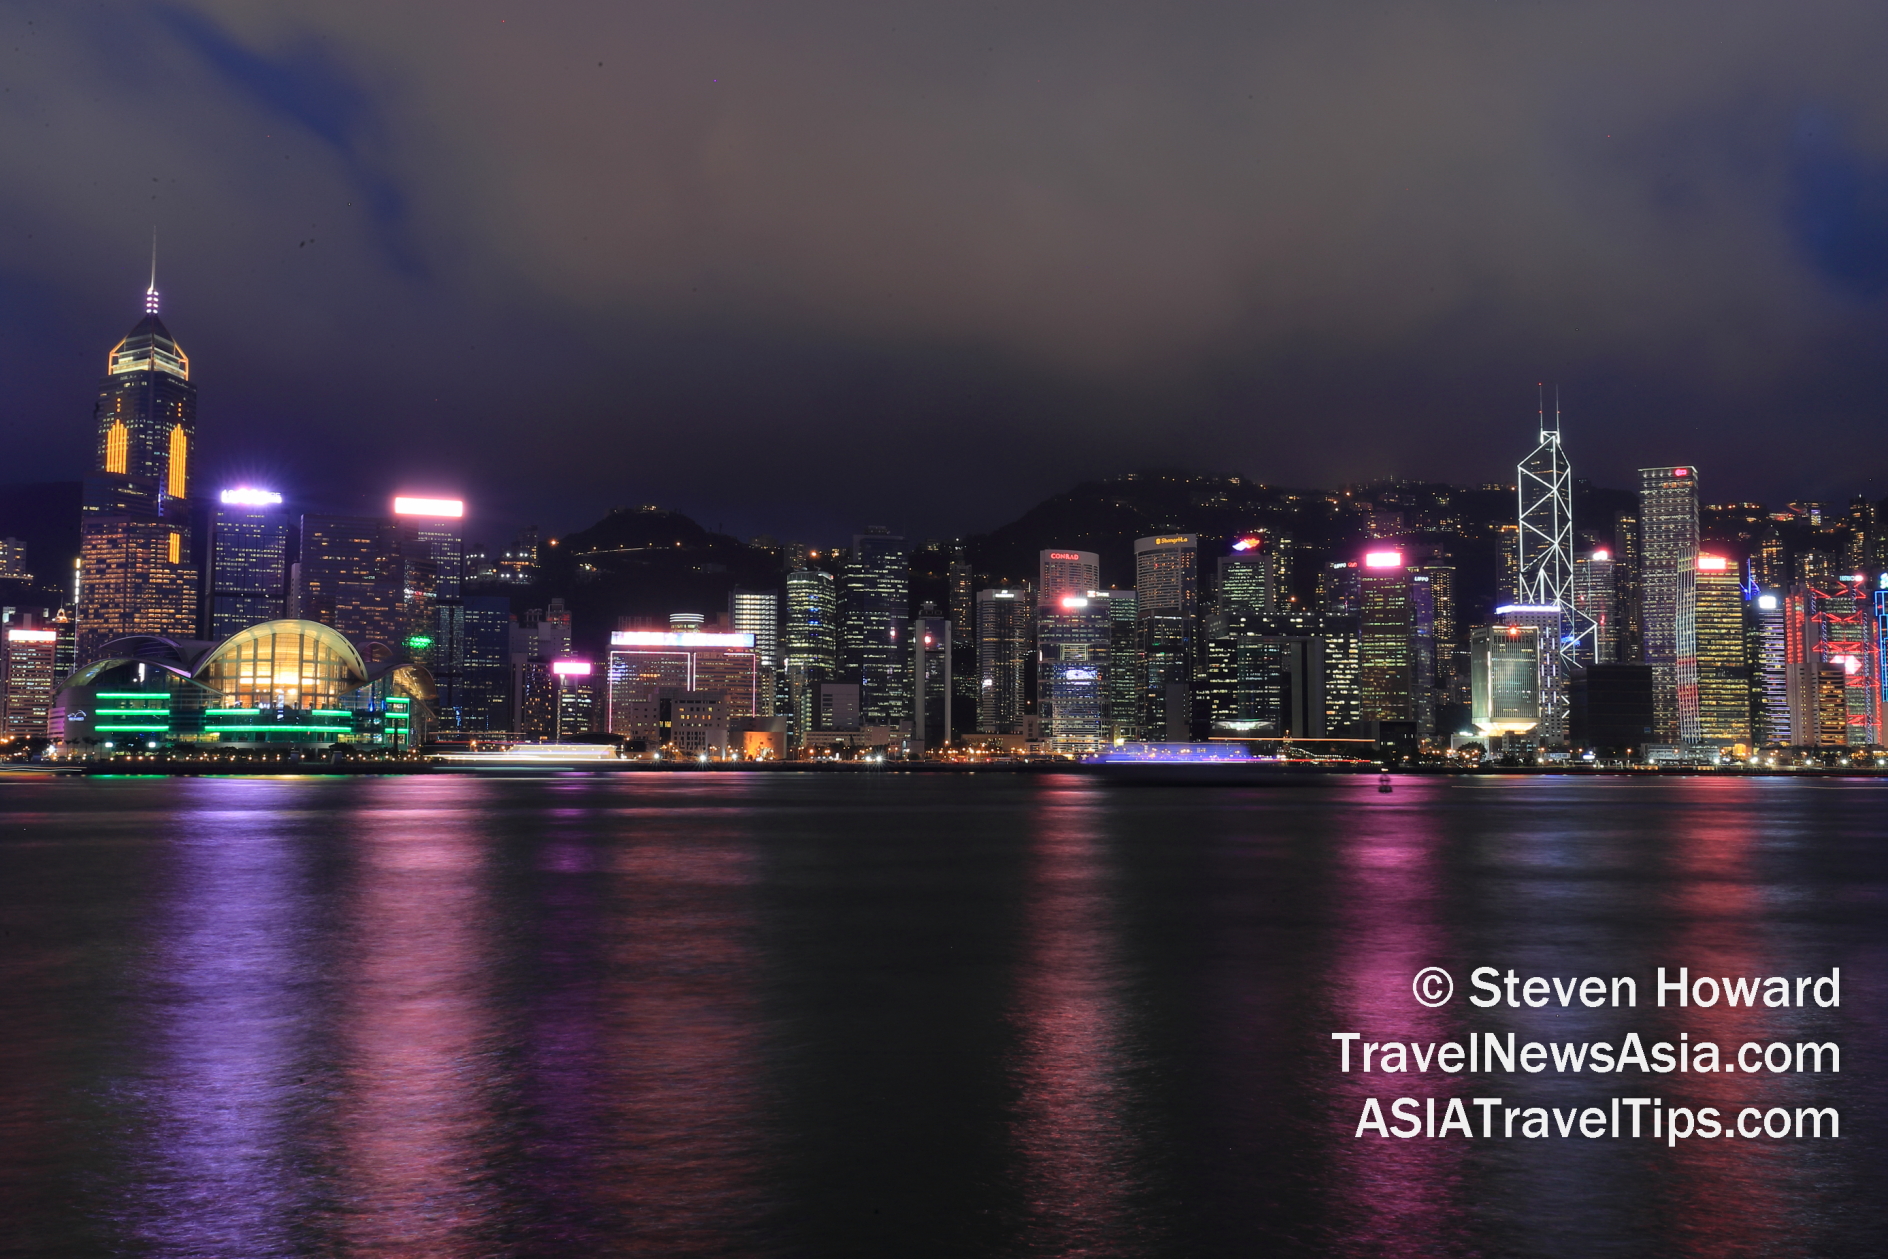 Hong Kong Island at night. Picture by Steven Howard of TravelNewsAsia.com Click to enlarge.